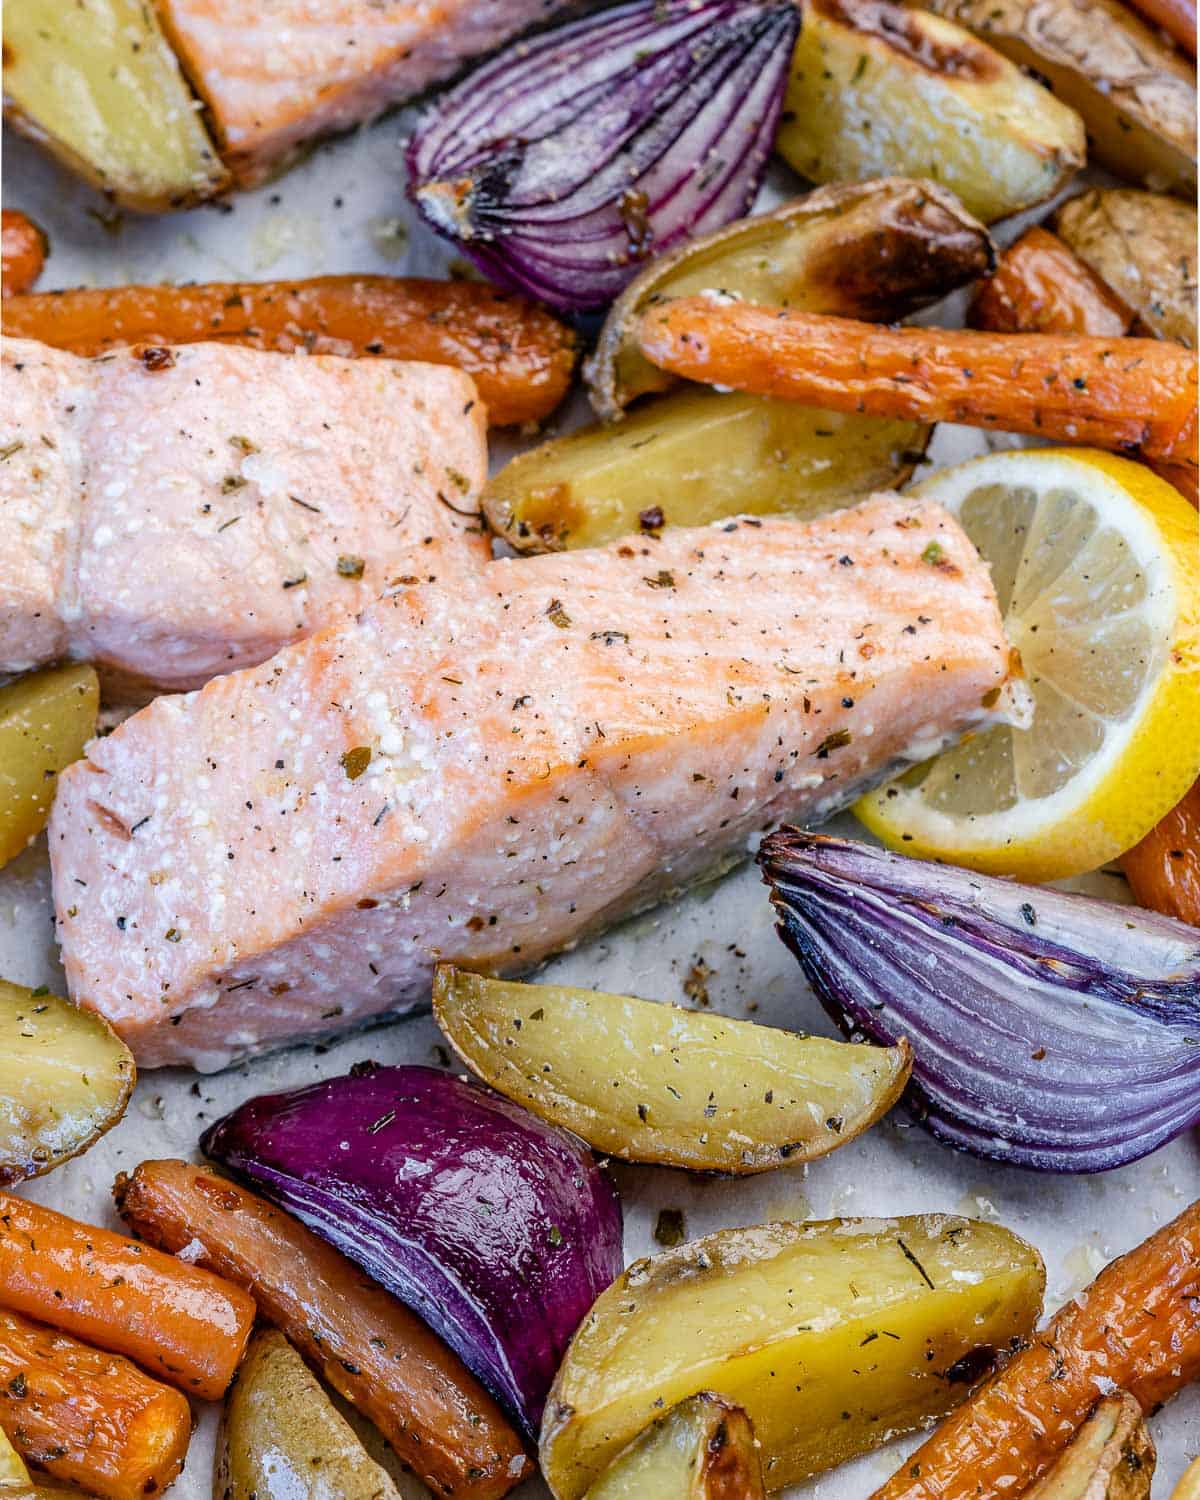 salmon fillets with lemon, potatoes, root veggies after baked in the oven